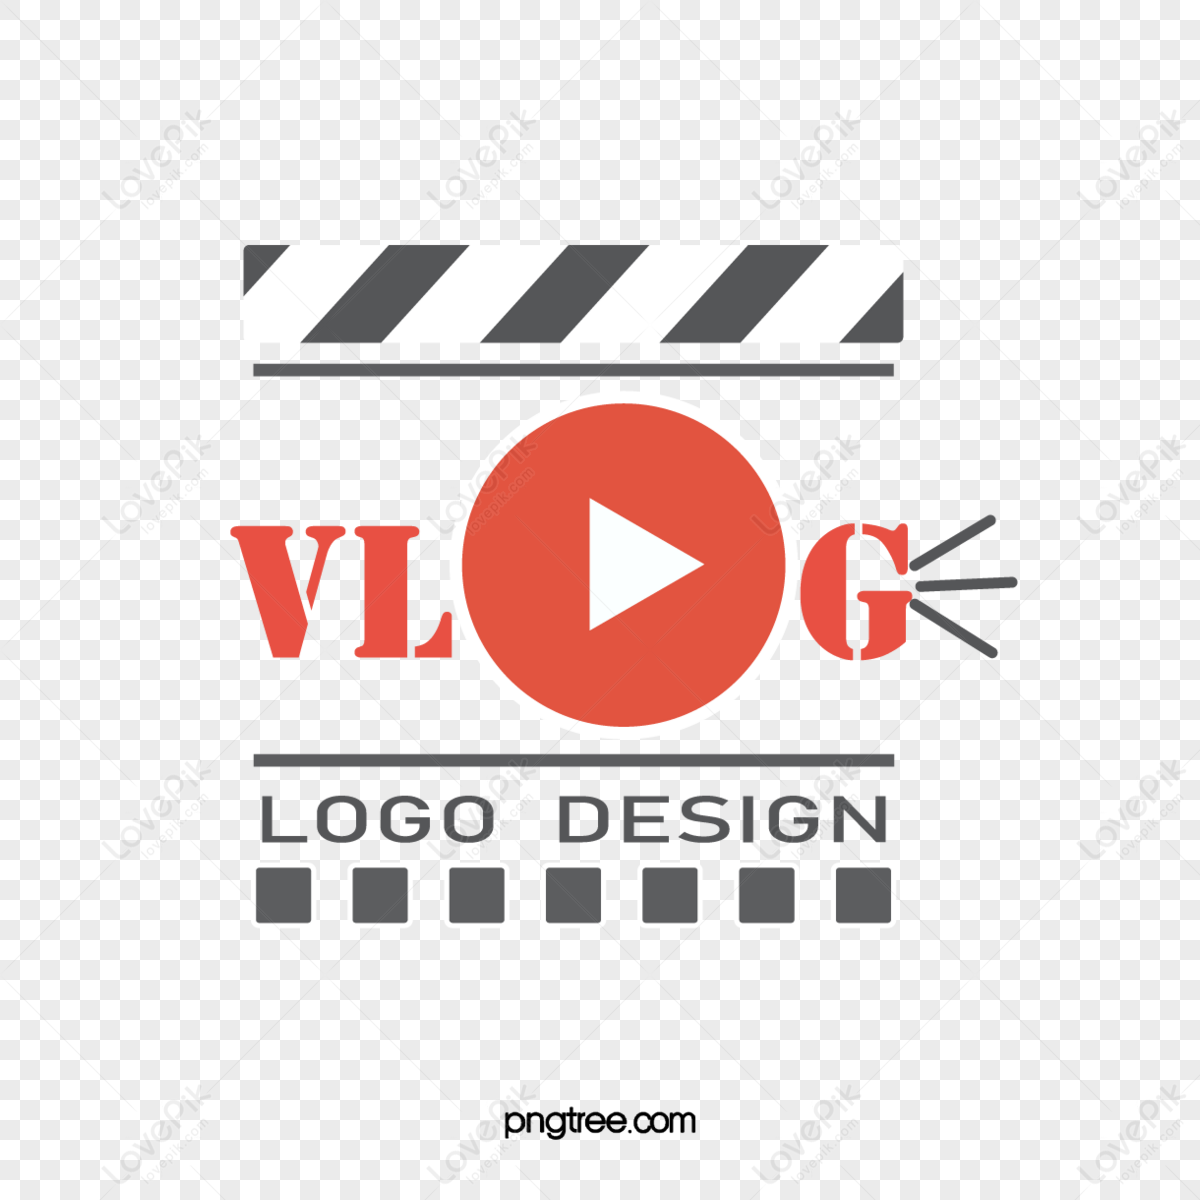 Vlog logo with old tv Royalty Free Vector Image